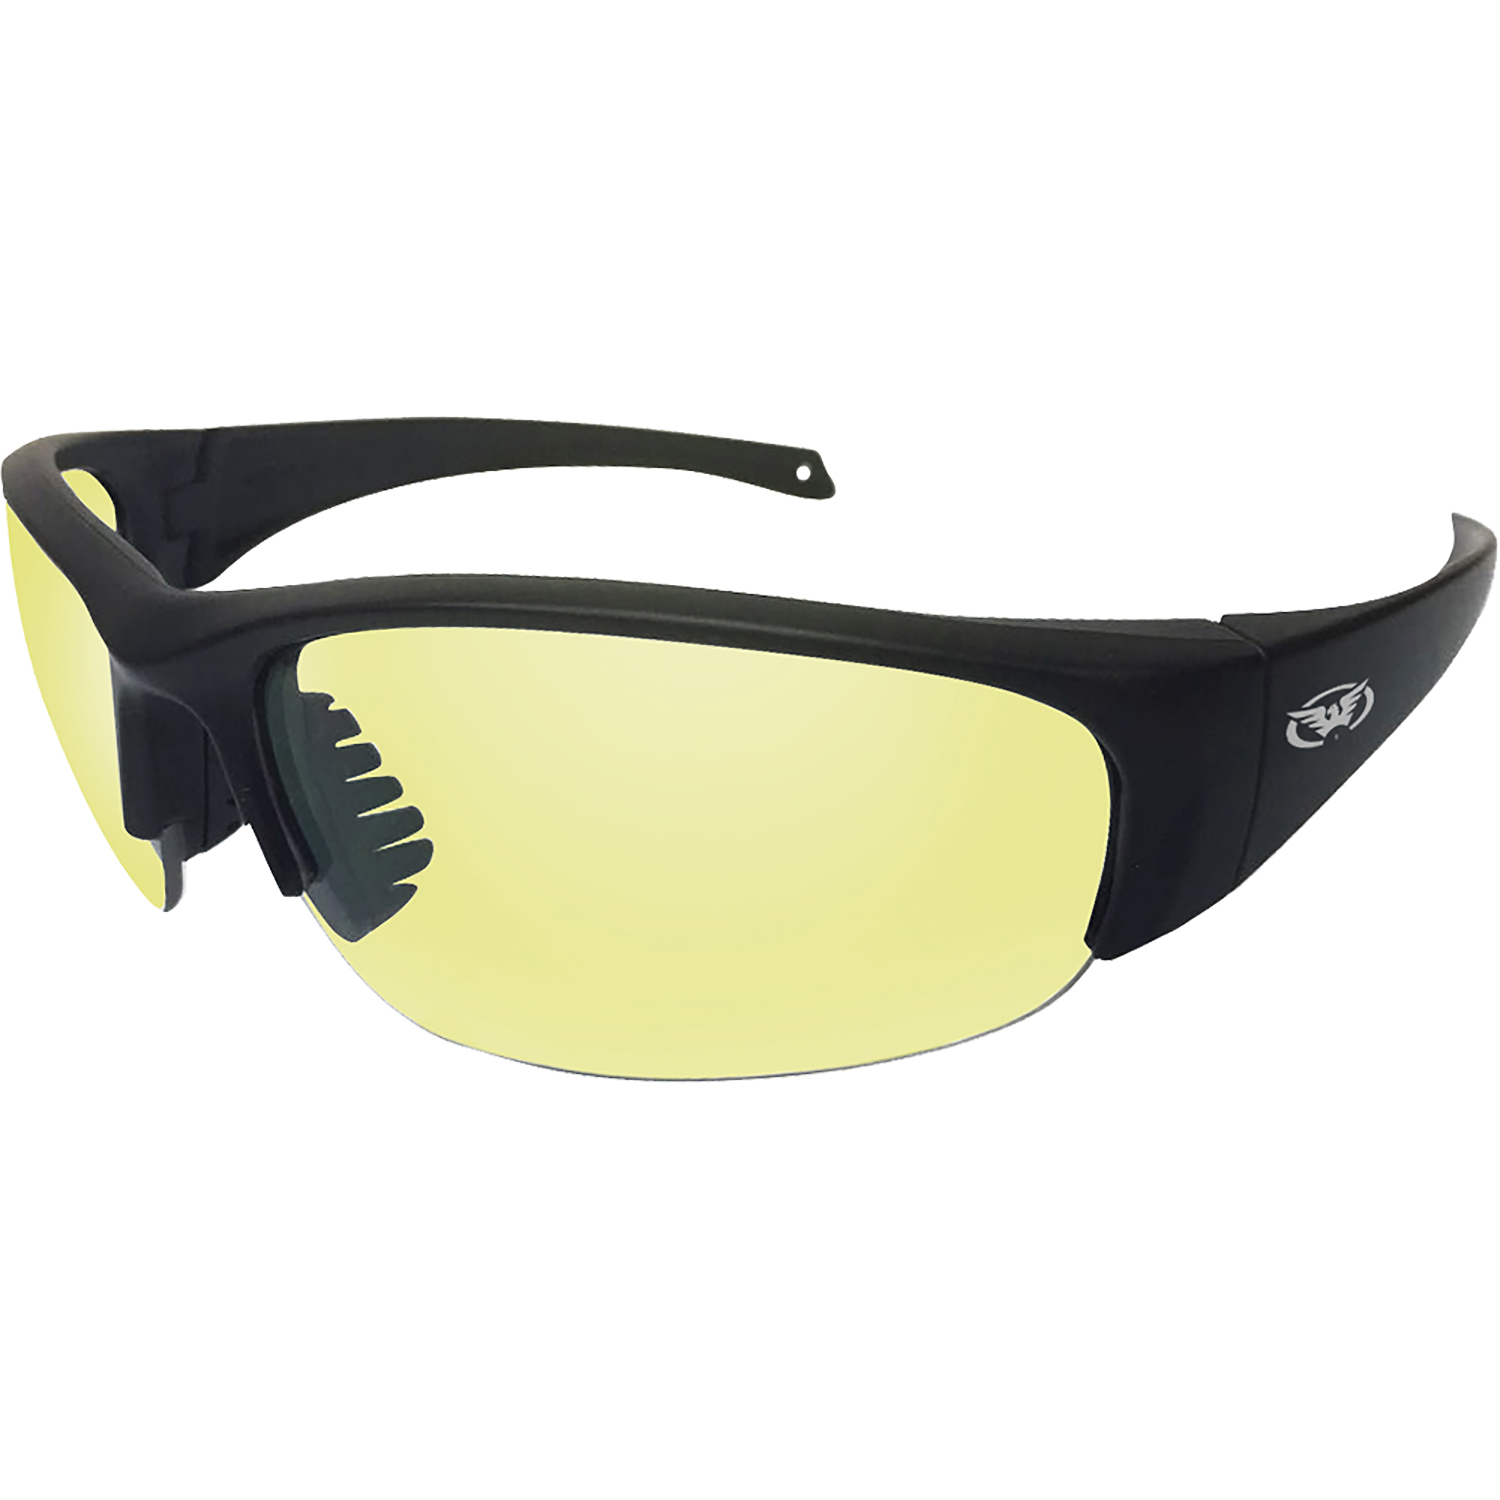 2 Pairs of Global Vision Eyewear Eyedol Motorcycle Safety Sunglasses Black Frames Yellow + G Tech Red Mirror Lenses - image 2 of 3